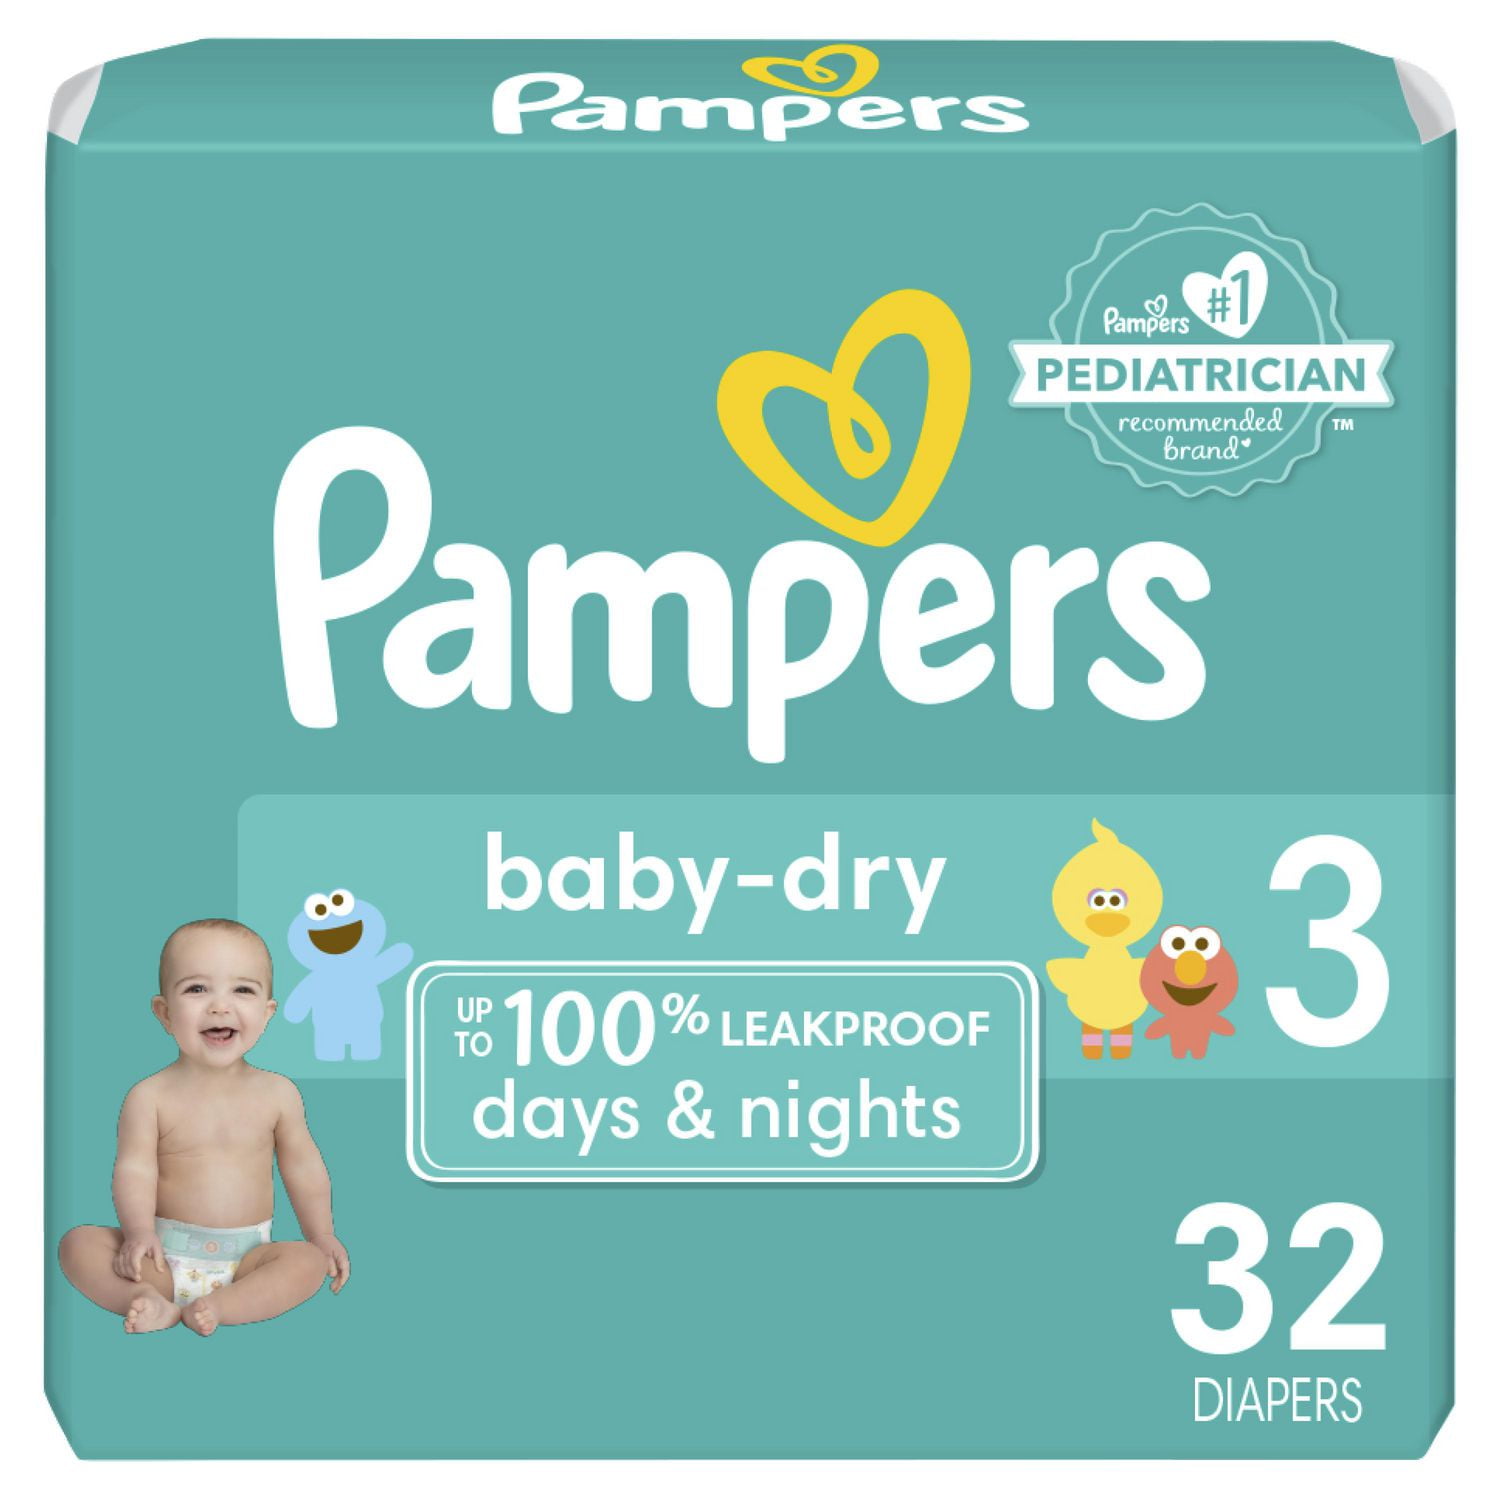 Pampers Pants Size 6 Jumbo Pack - 30150 (16+ Kg)